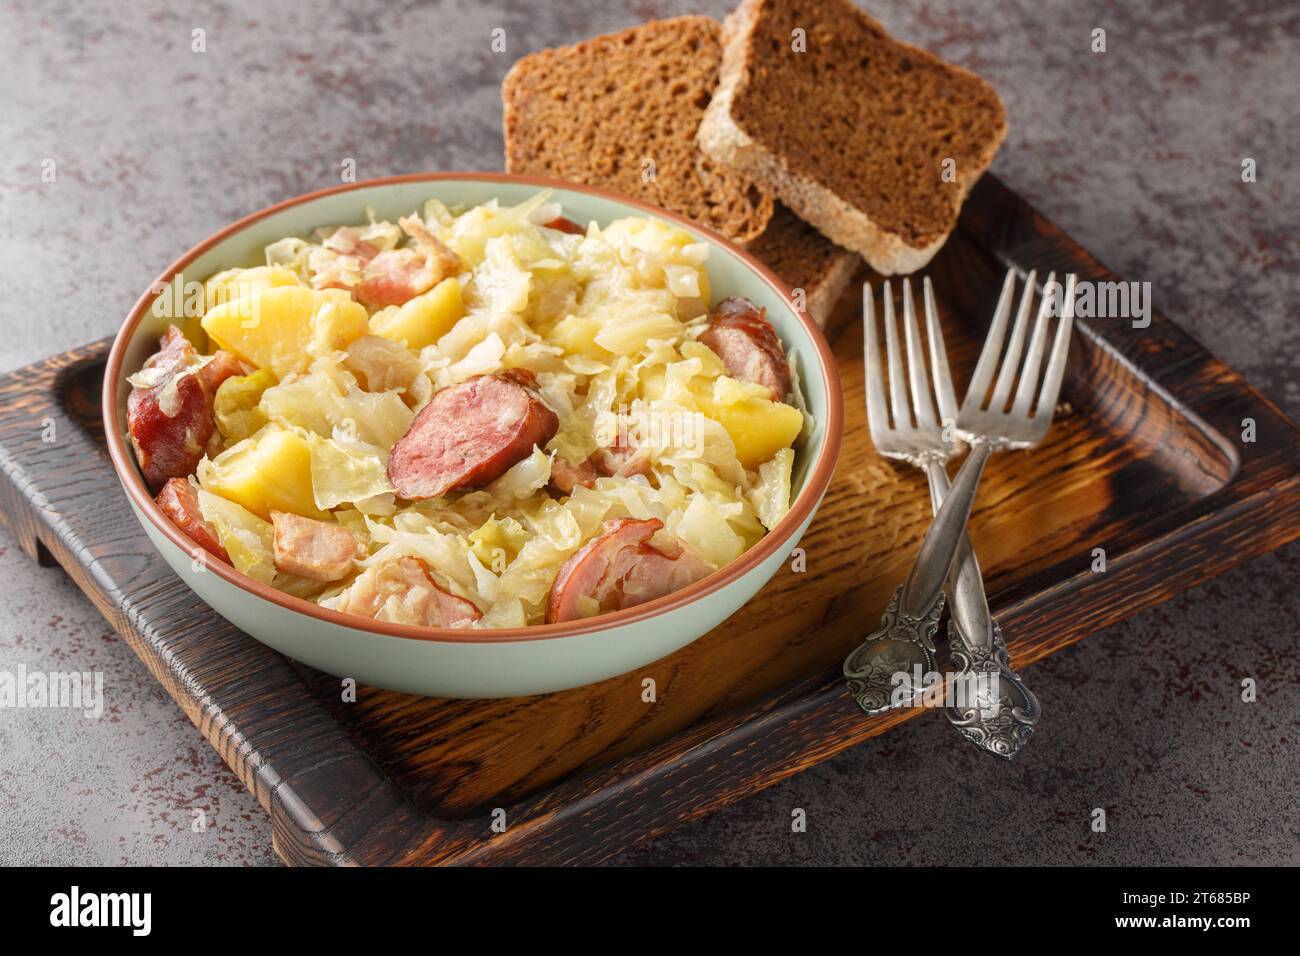 Cabbage stewed with potatoes, sausage, bacon and onions close-up in a bowl on the table. Horizontal Stock Photo